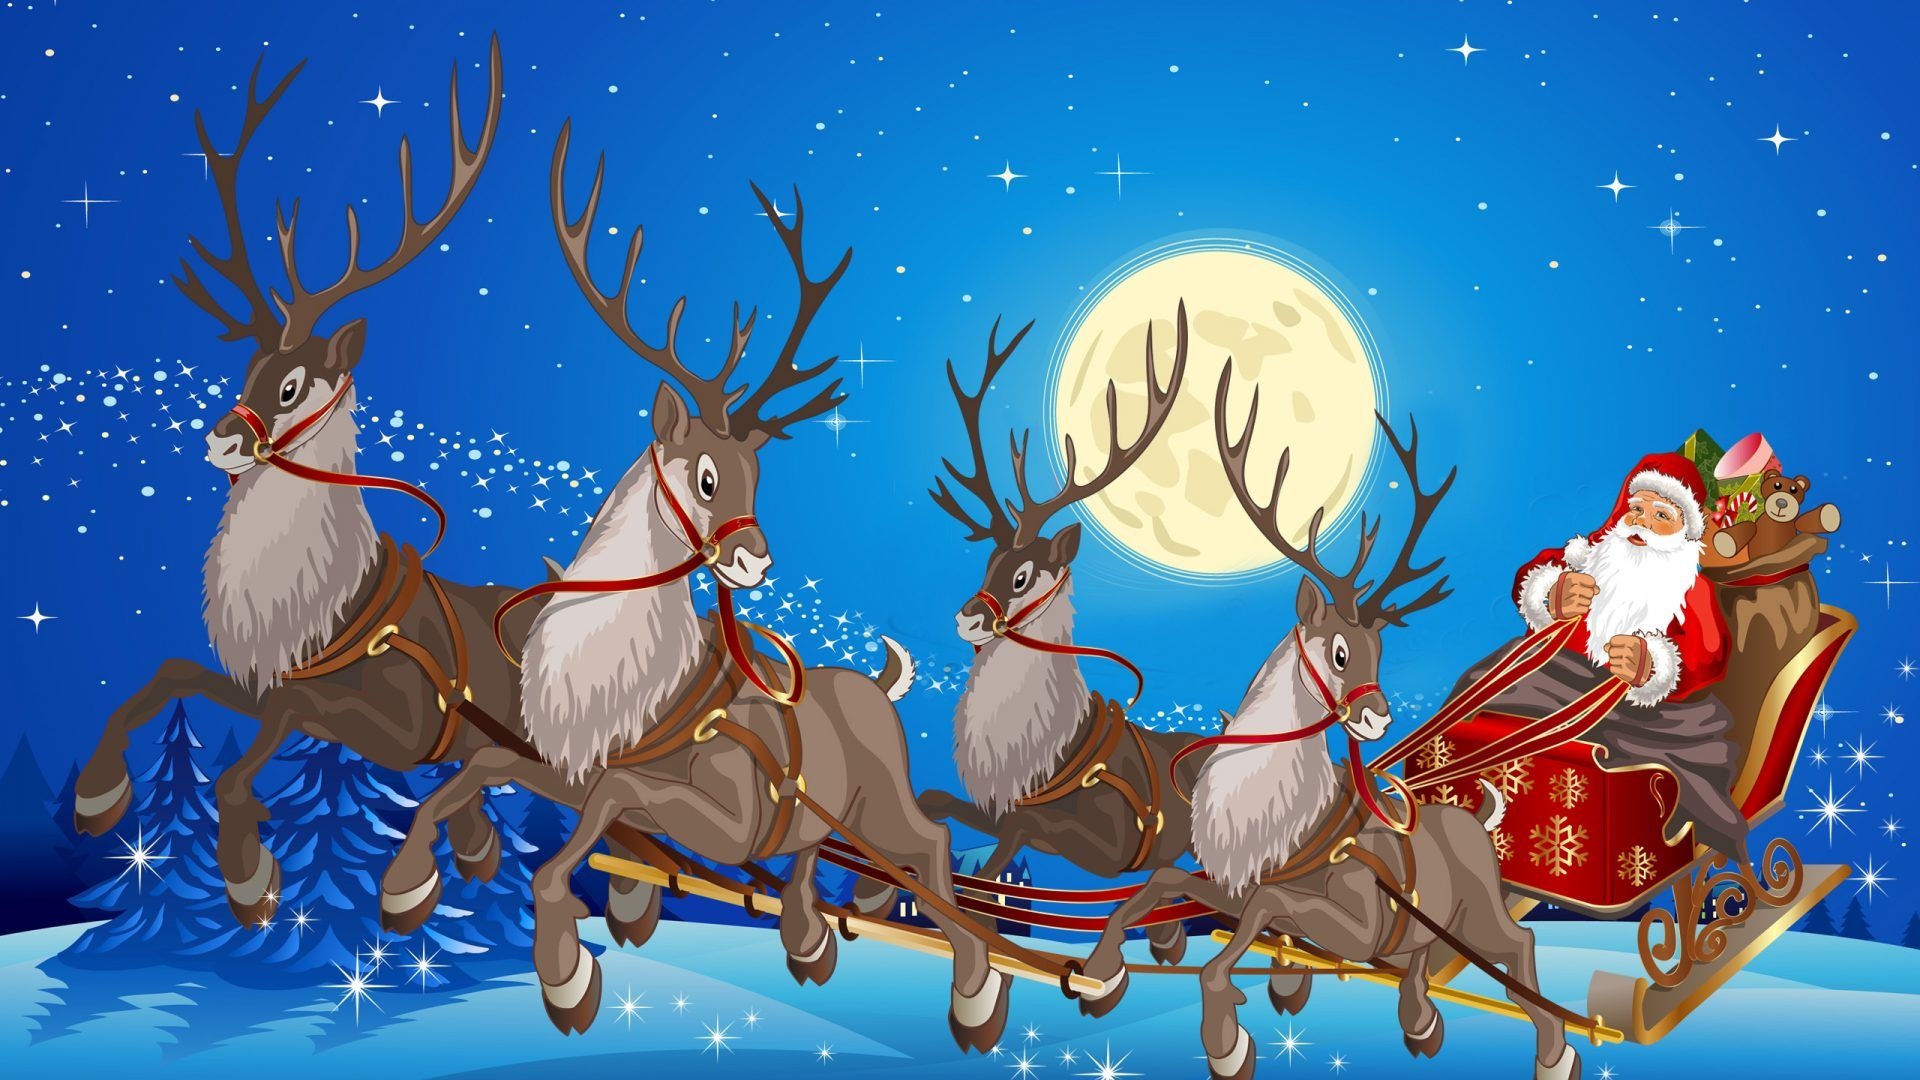 Santa Claus wallpapers, Christmas backgrounds, Holiday celebration, 1920x1080 Full HD Desktop